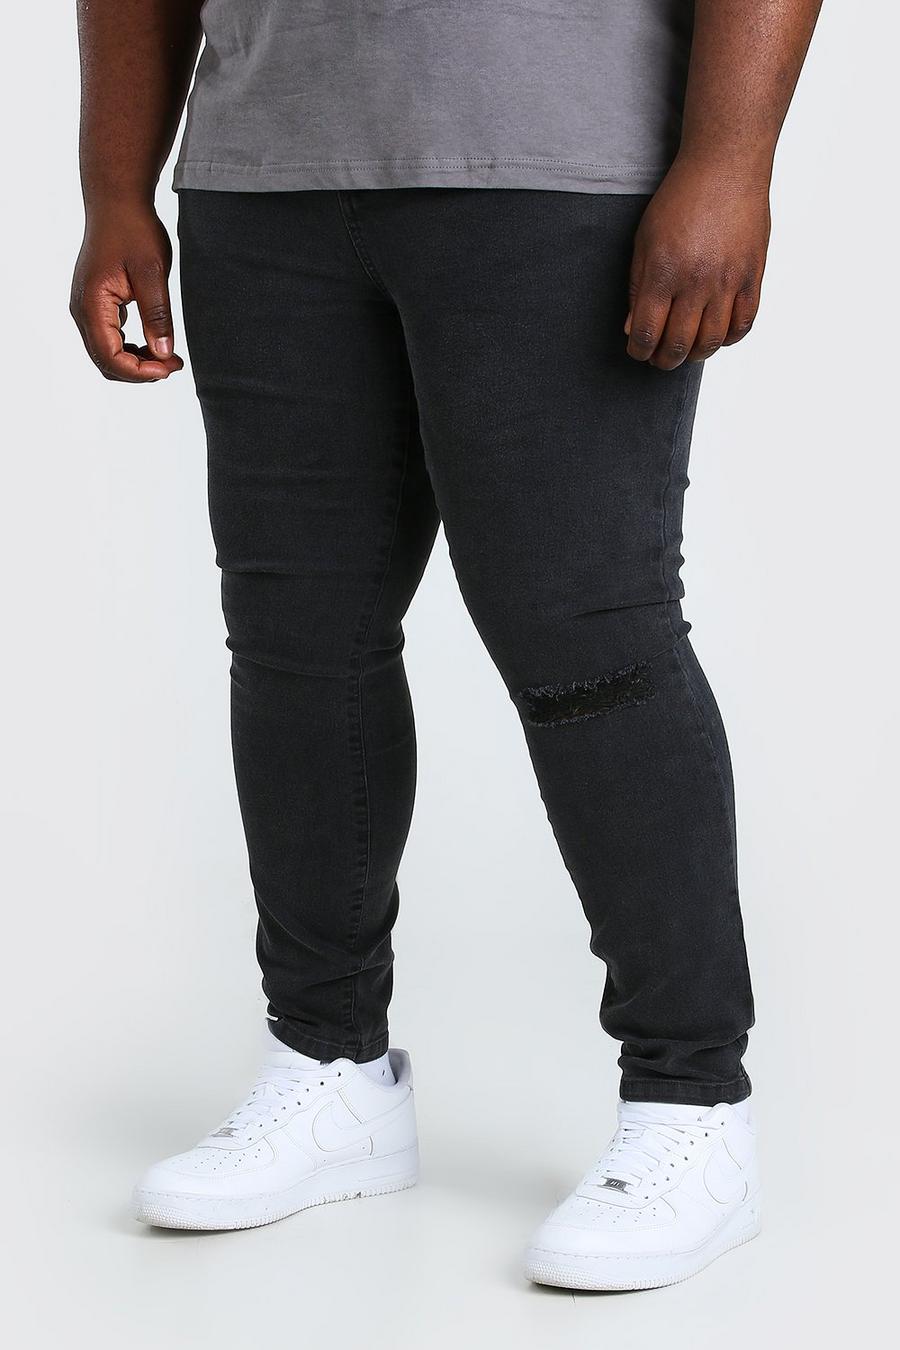 Charcoal grey Plus Size Busted Knee Super Skinny Jean image number 1